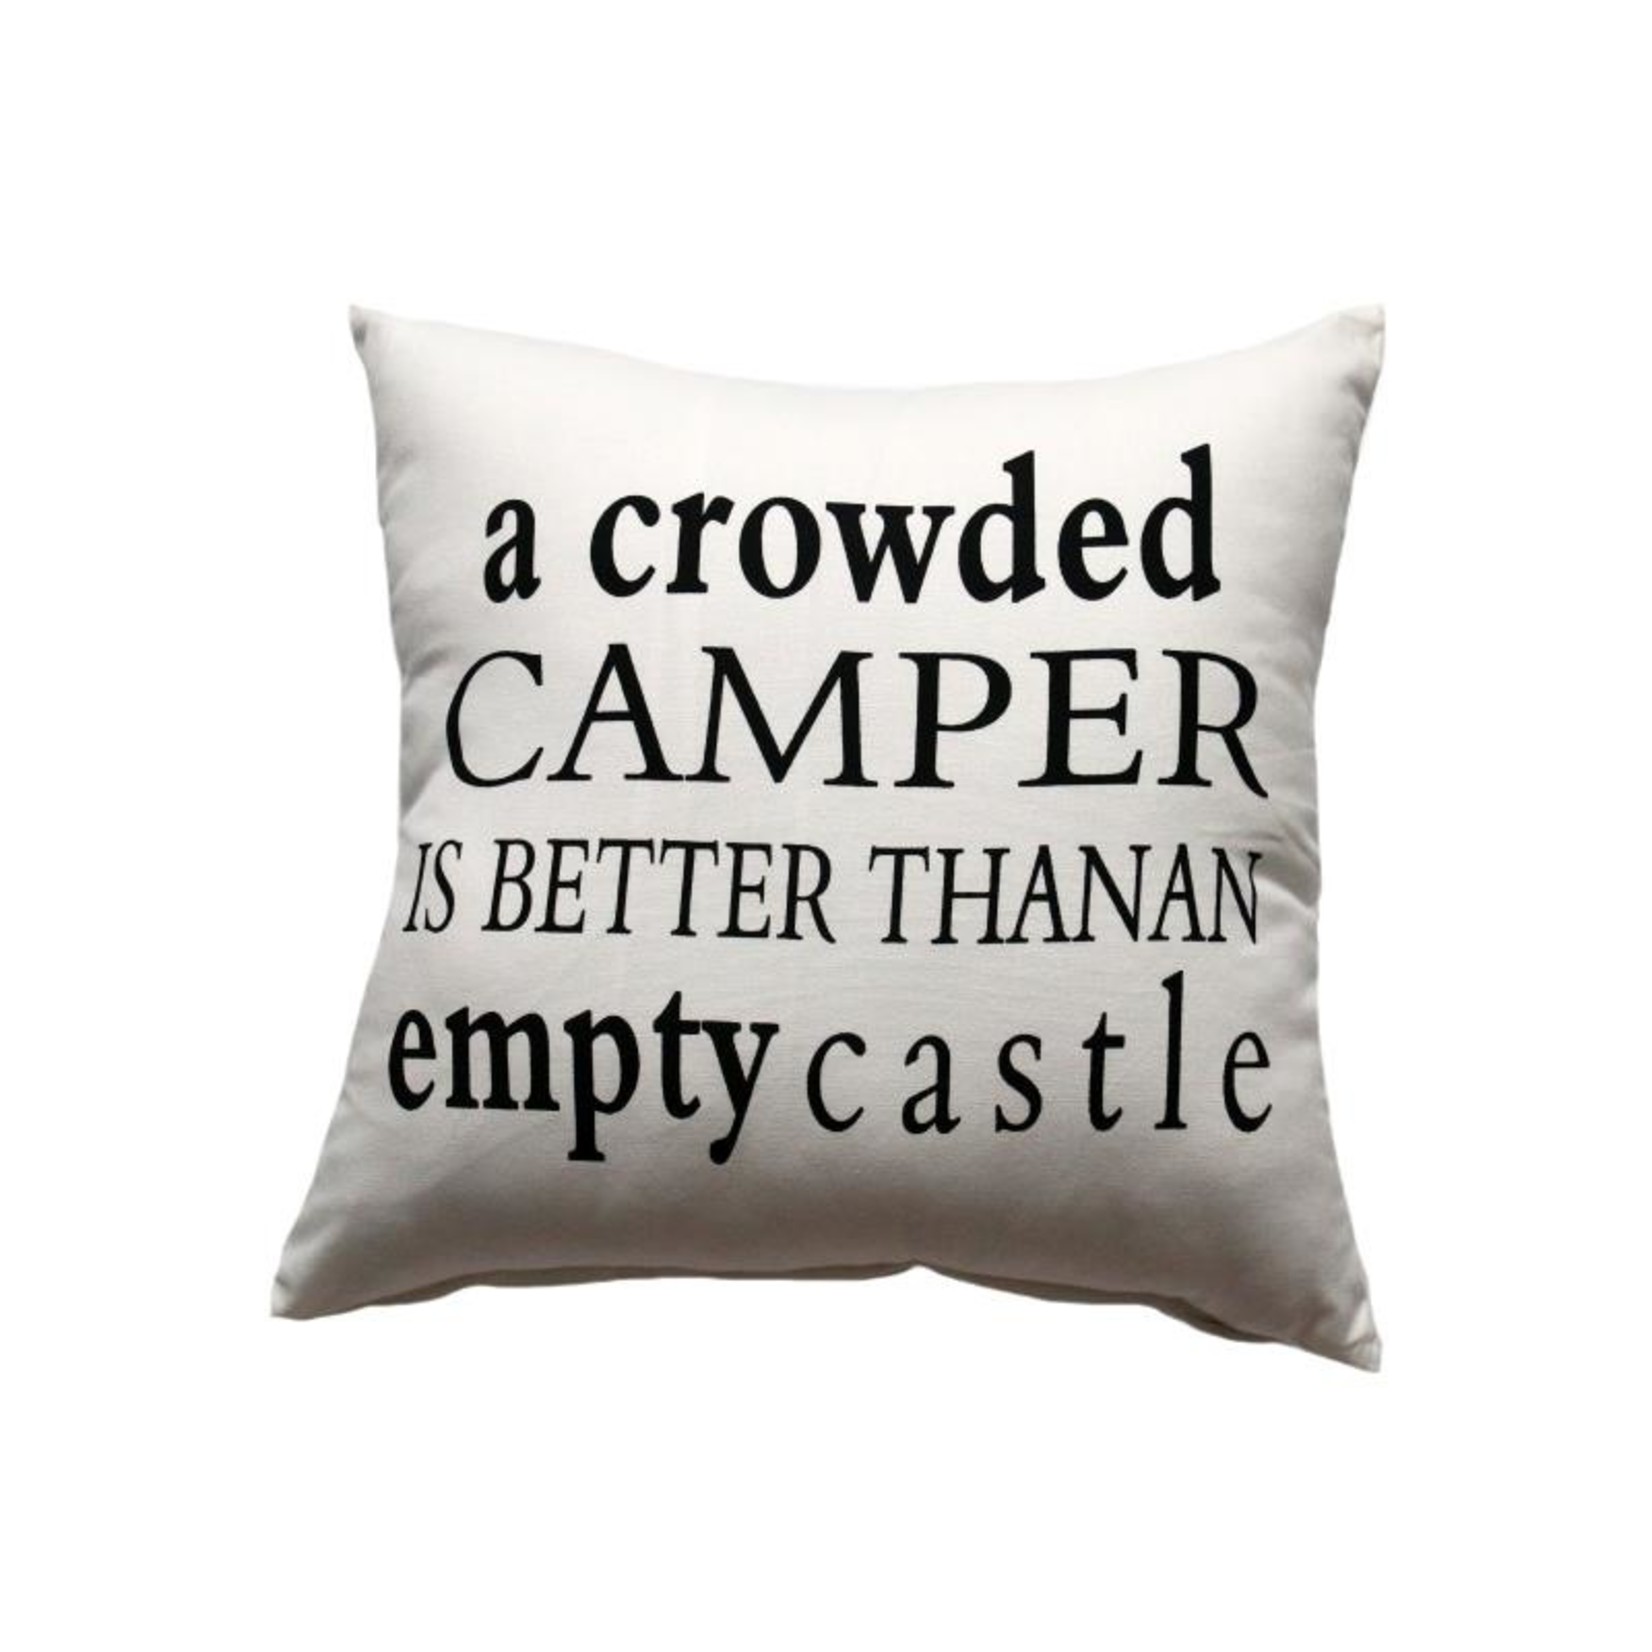 Koppers Crowded Camper Pillow - 18x18